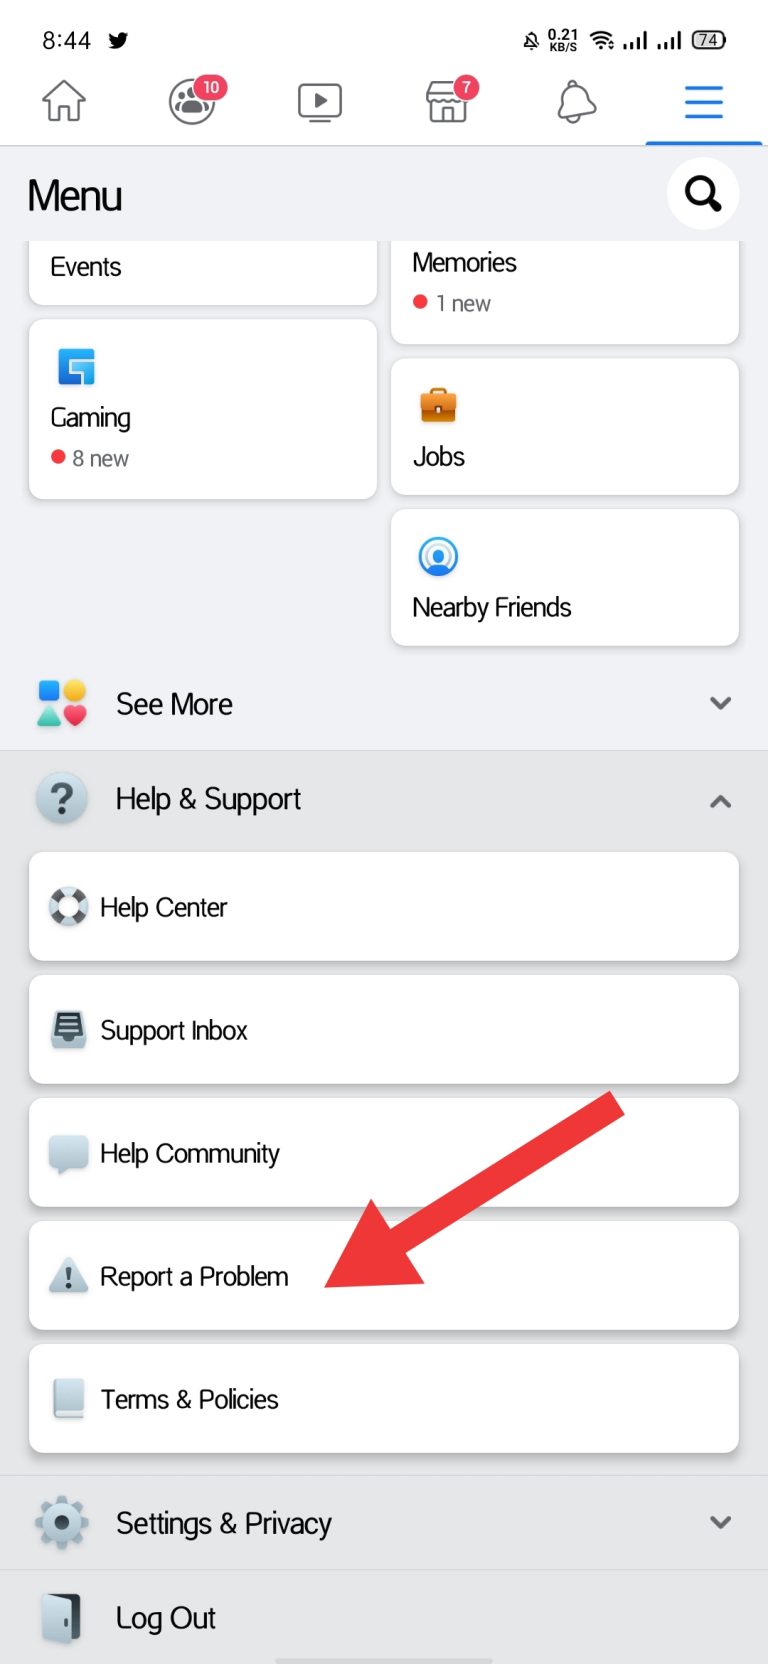 How to Contact Facebook Support The Ultimate Guide